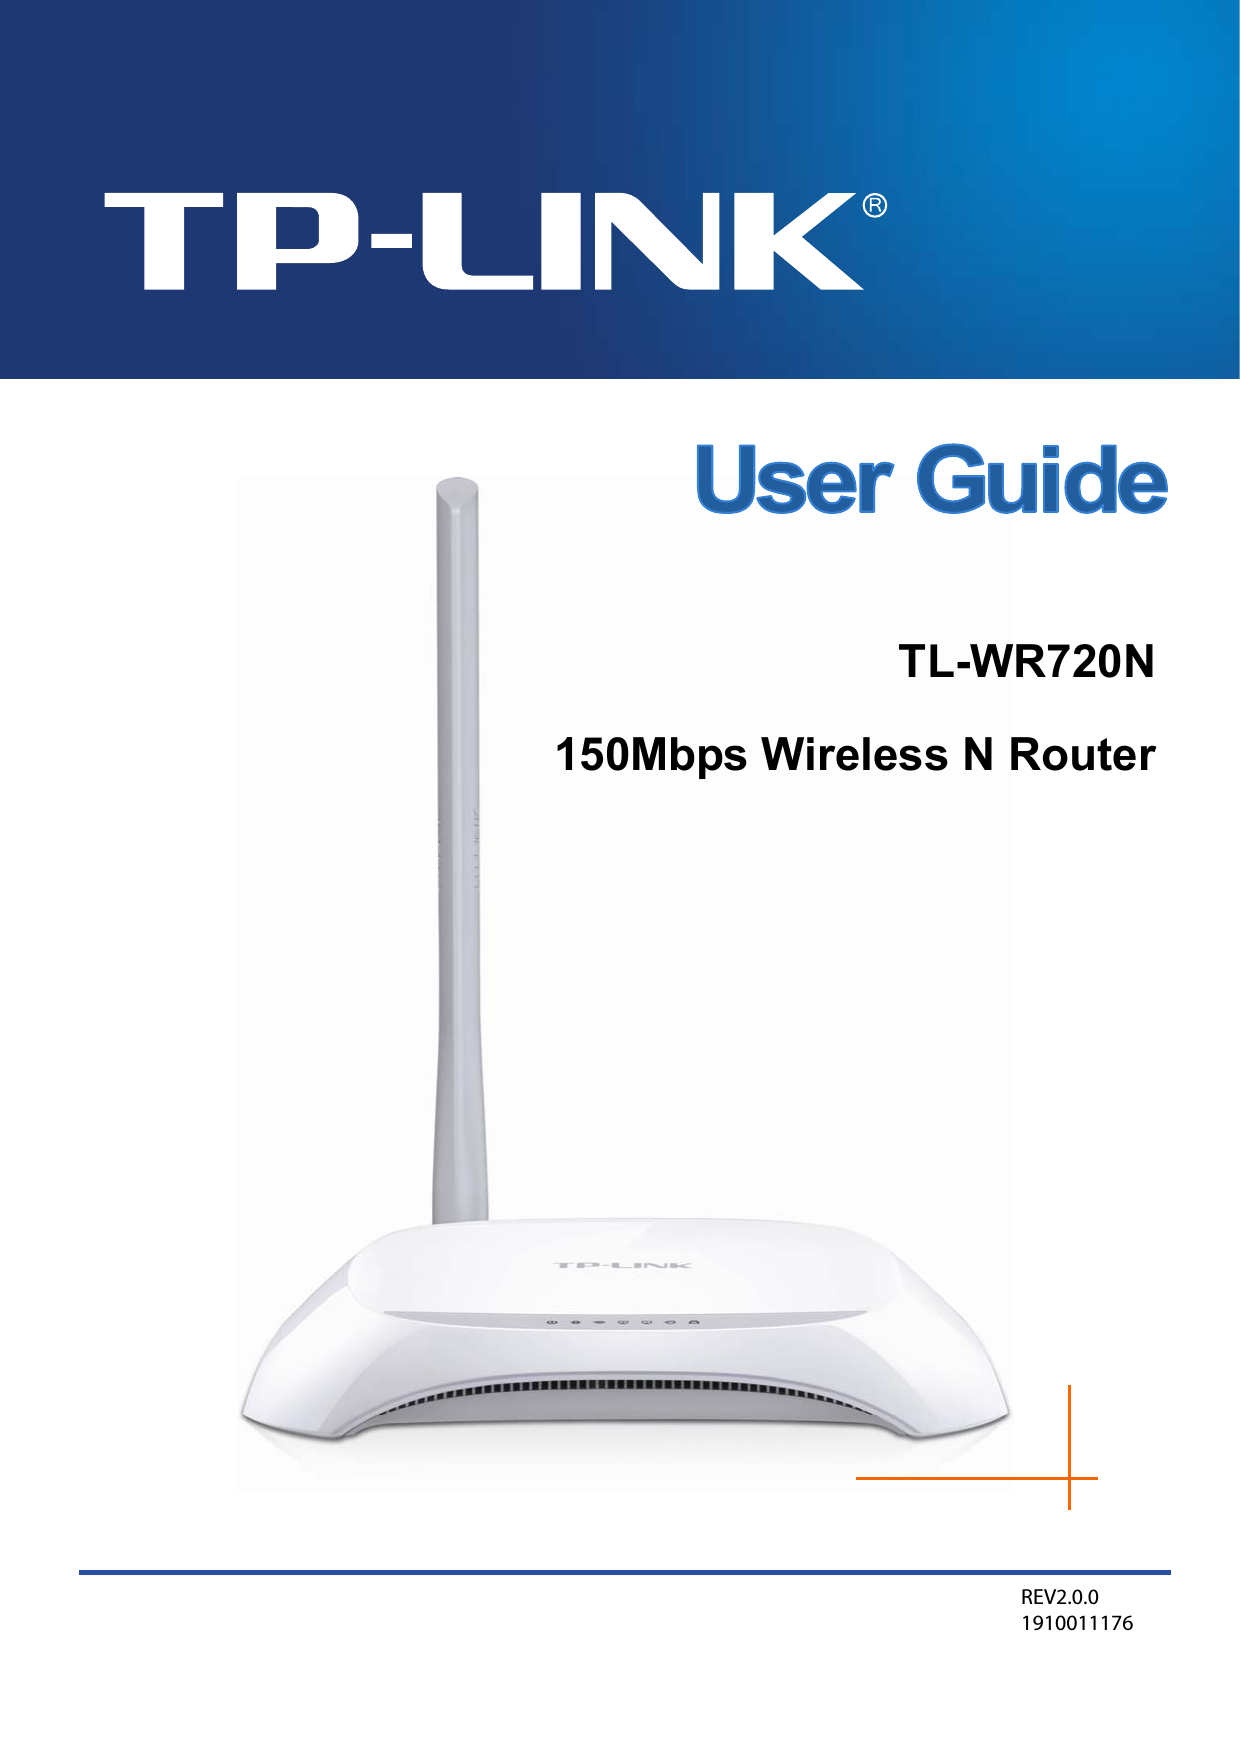    TL-WR720N 150Mbps Wireless N Router     REV2.0.0 1910011176 